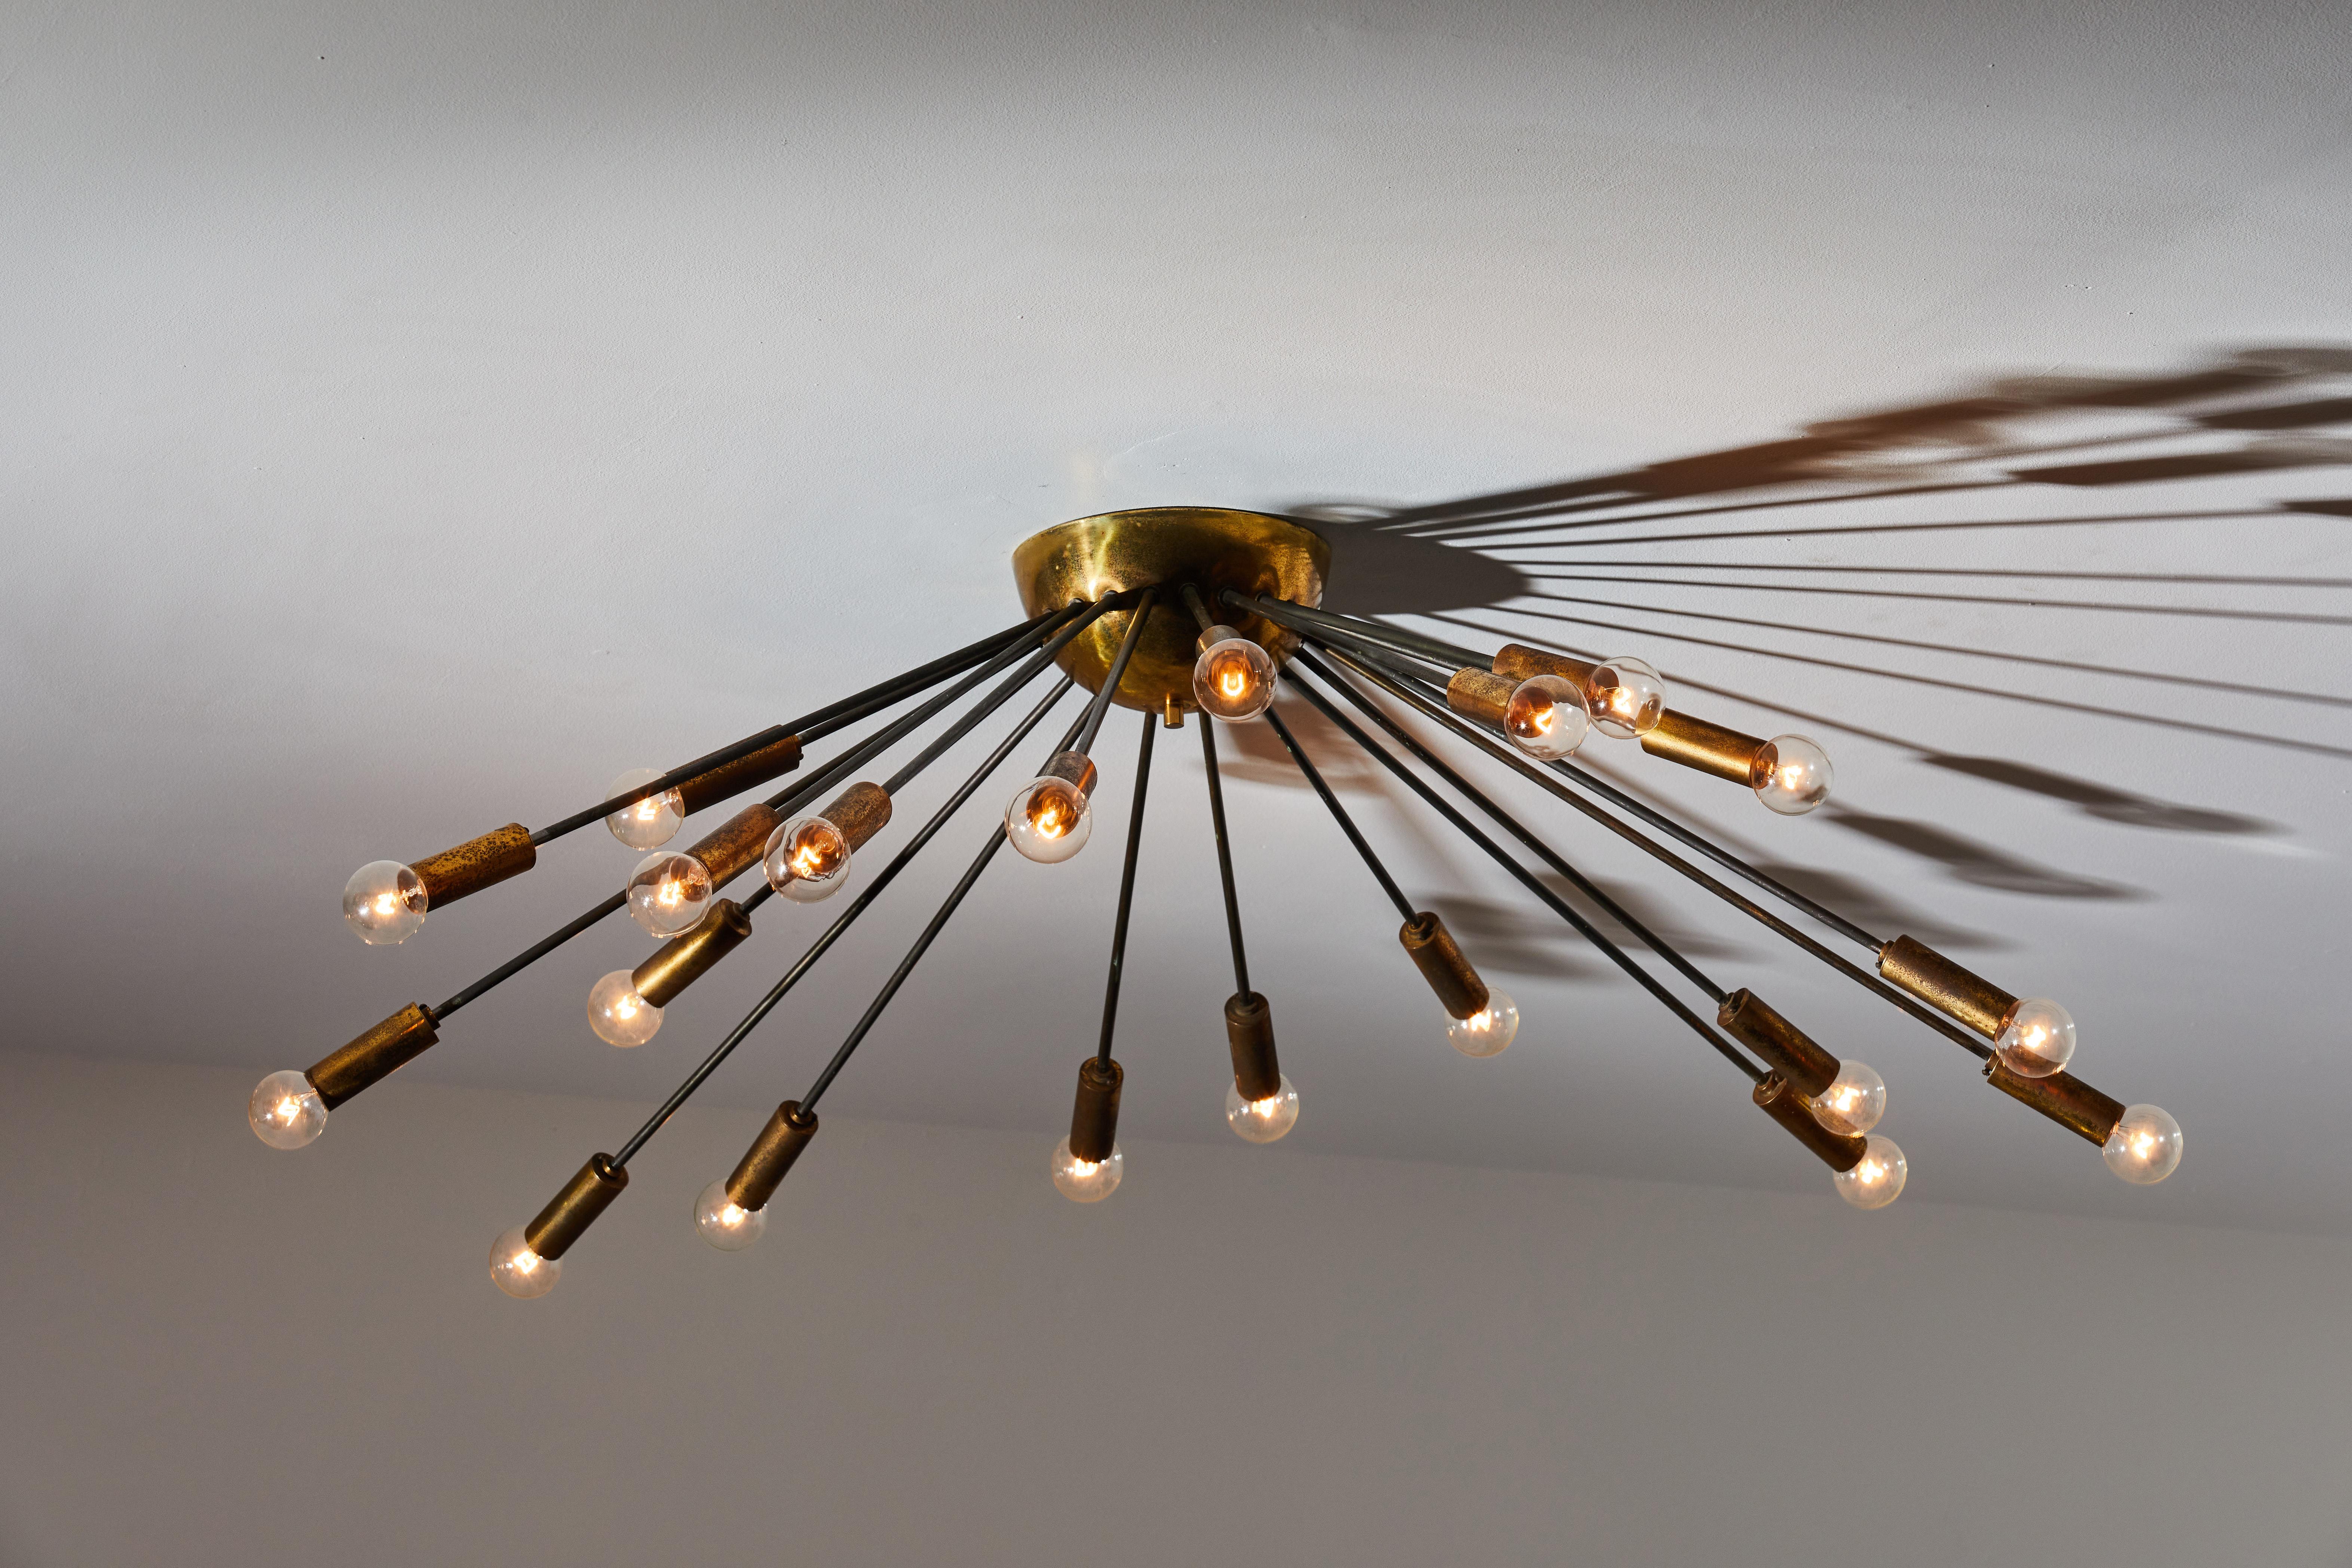 Twenty arm flush mount chandelier by Stilnovo. Manufactured in Italy, circa 1950s. Rewired for U.S. junction boxes. Brass. Takes 20 E27 candelabra 40w maximum bulbs. Bulbs provided as a one time courtesy.